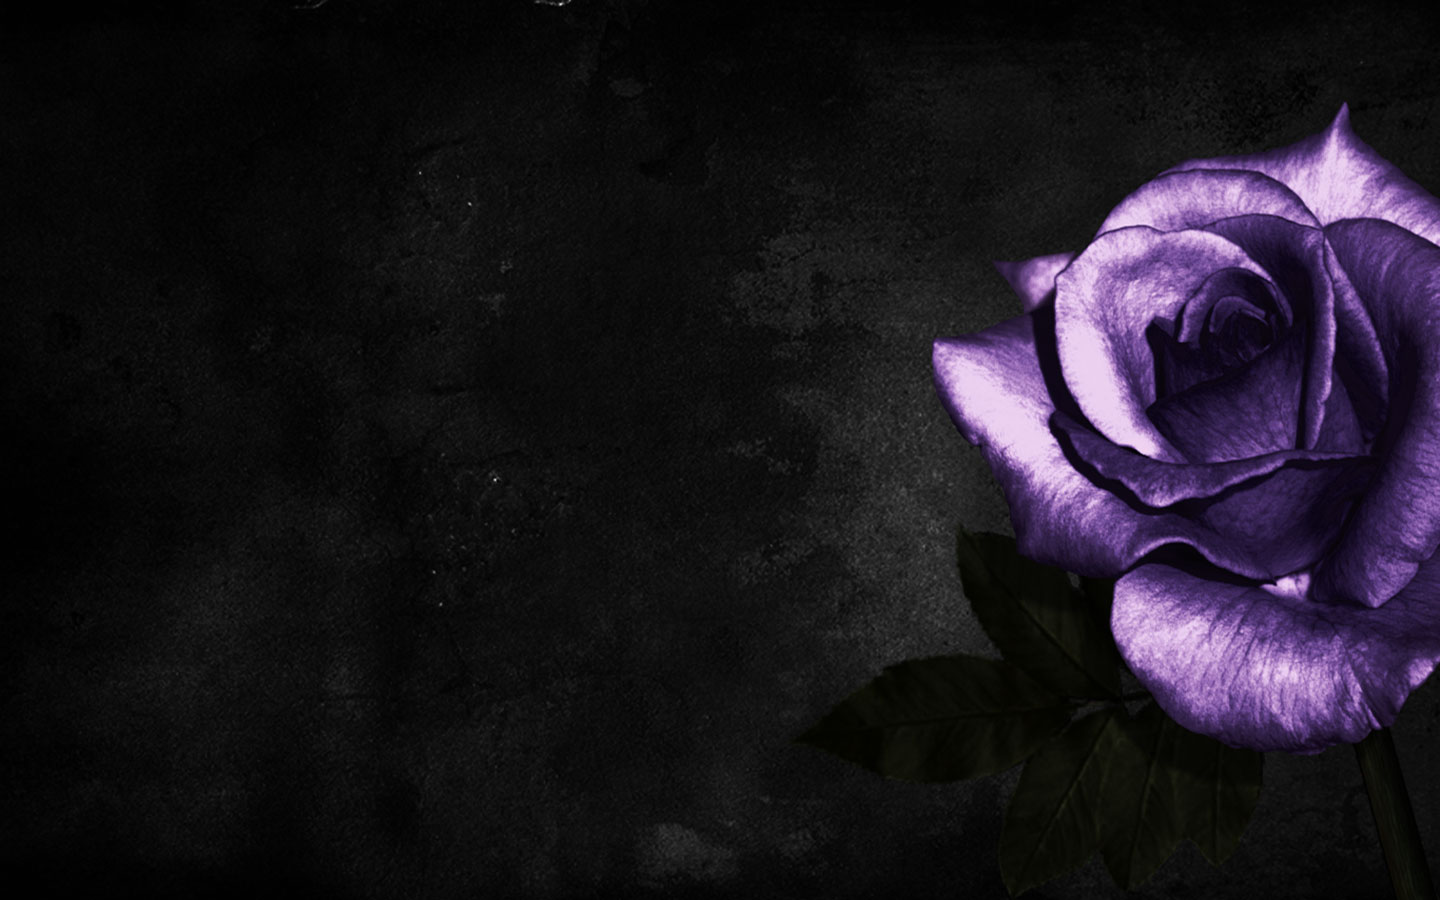 Purple Music Notes Wallpaper 10459 Hd Wallpapers in Music   Imagesci